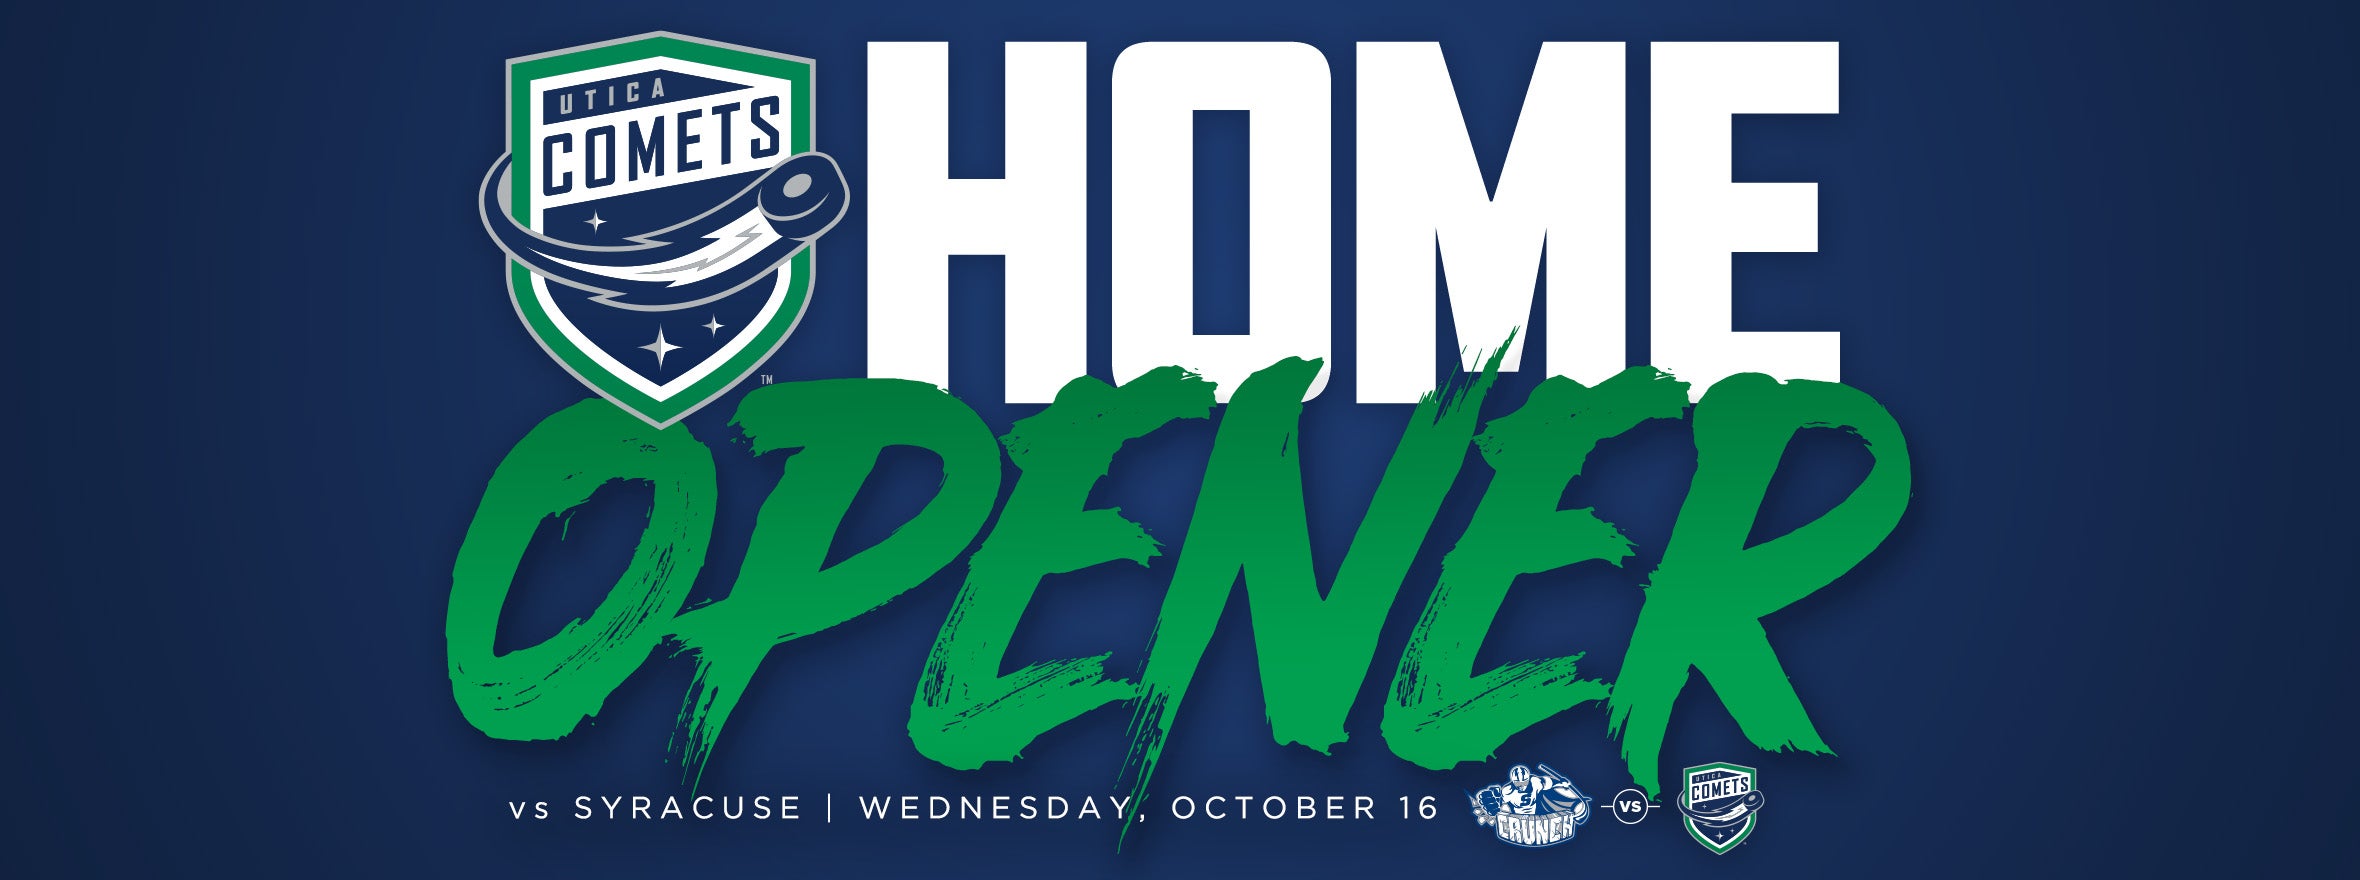 COMETS ANNOUNCE HOME OPENING DATE